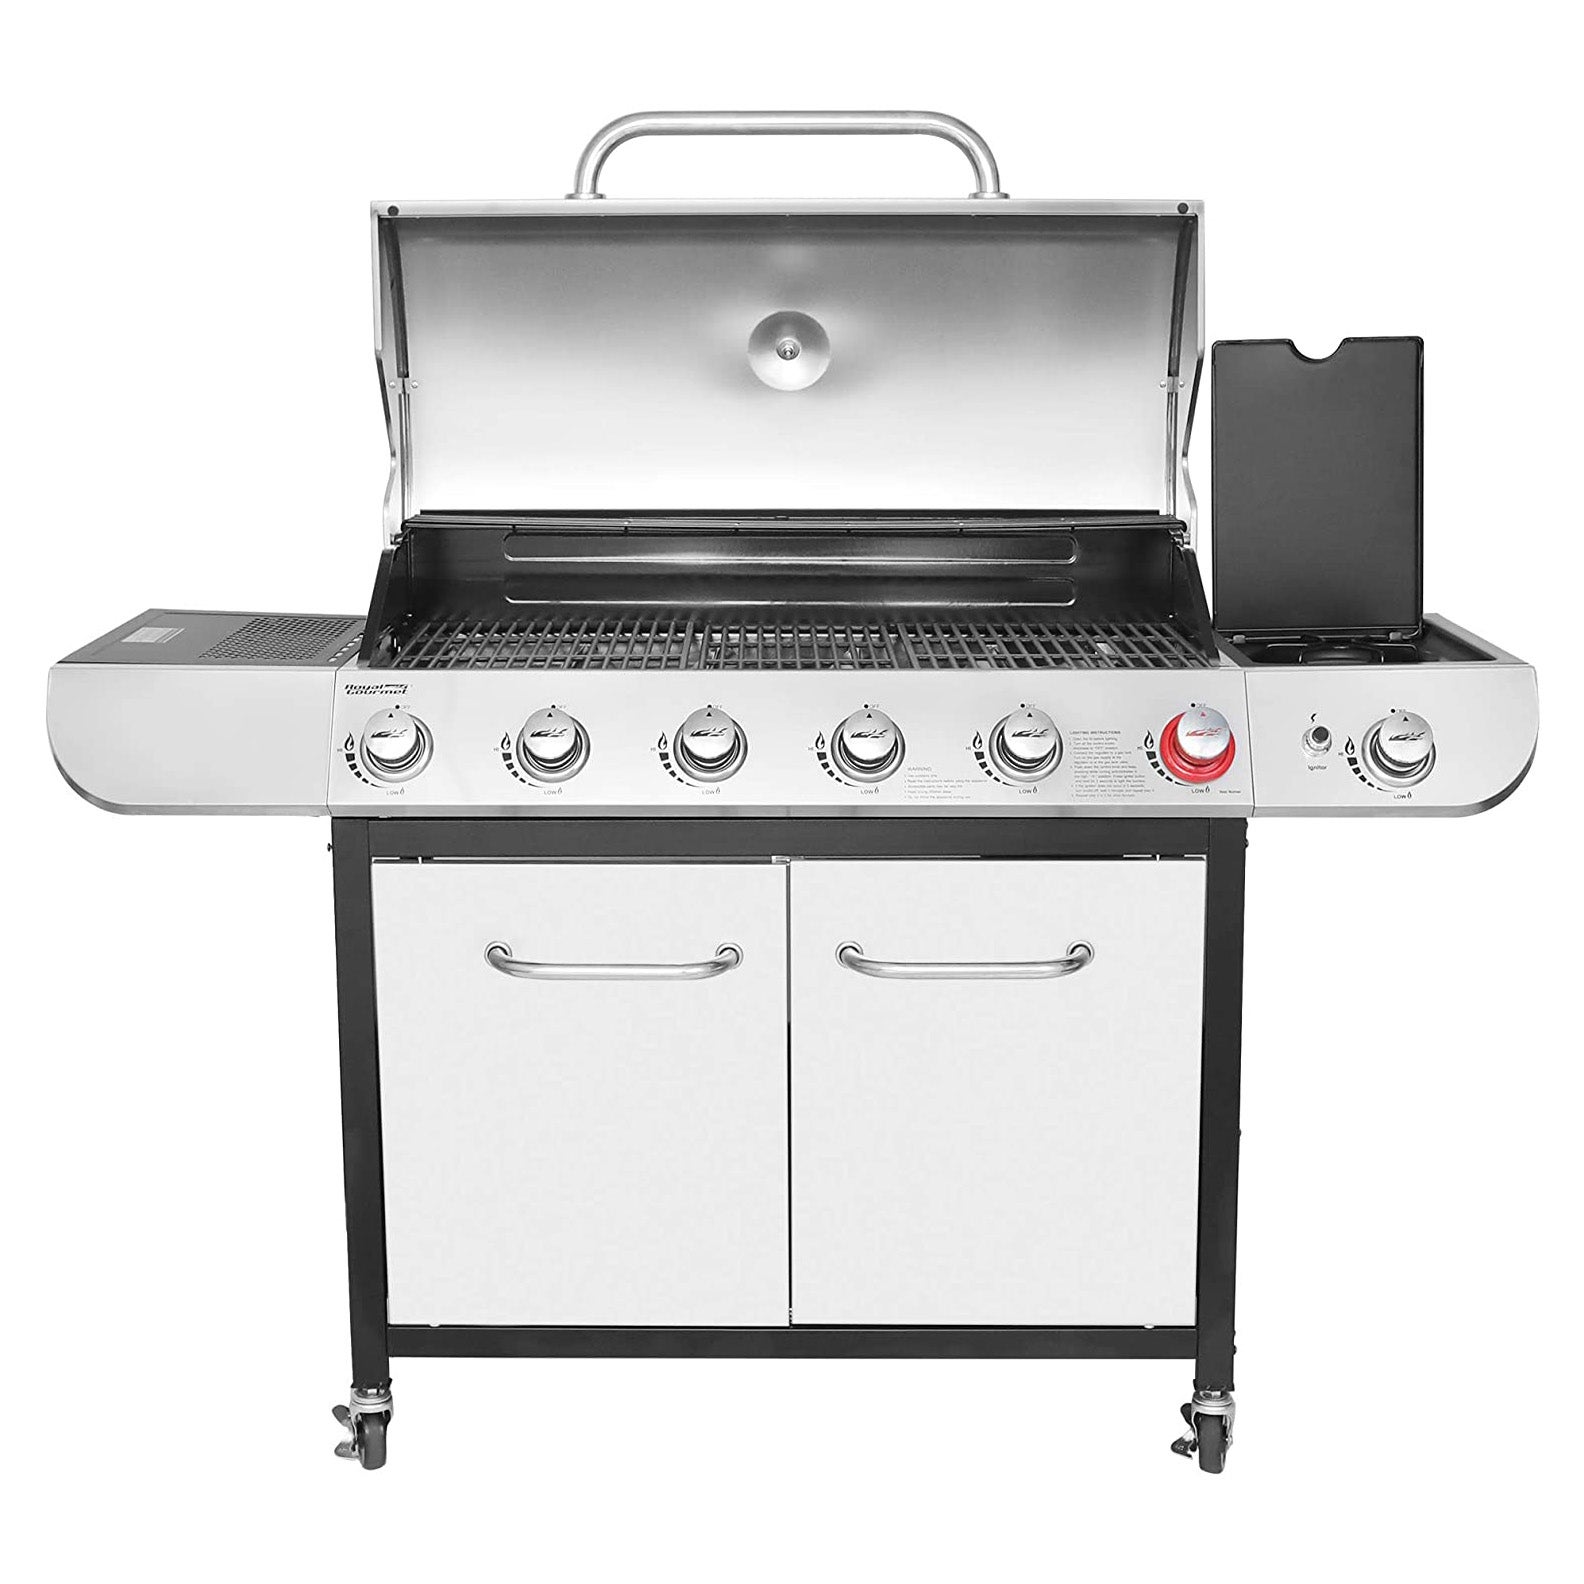 Royal Gourmet 6-Burner BBQ Propane Gas Grill with Side Burners